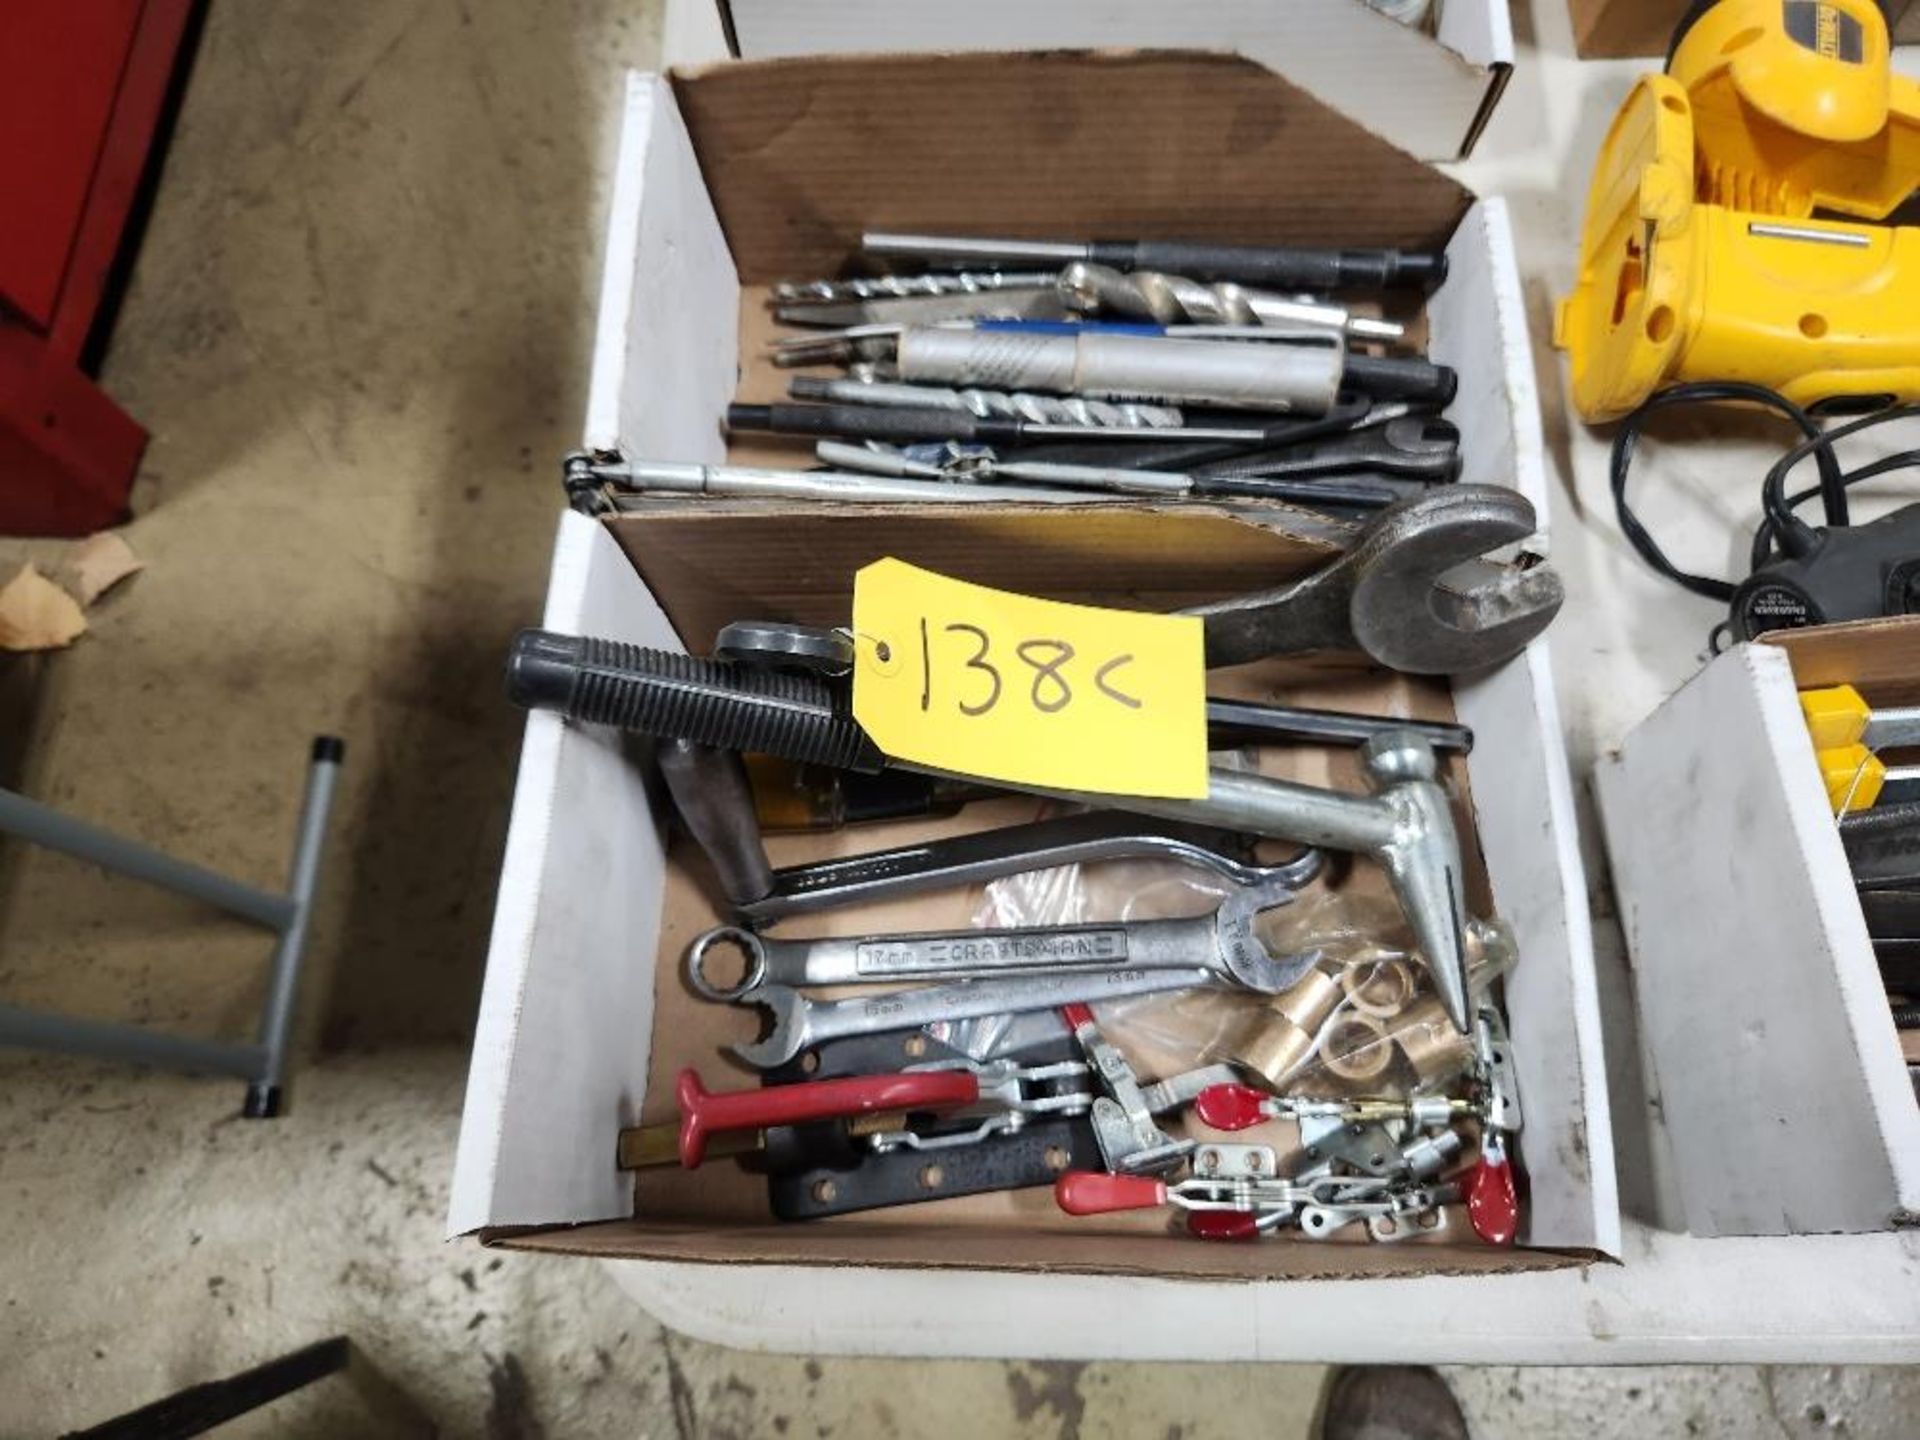 (2) BOXES OF DRILL BITS, WRENCHES AND PUNCHES